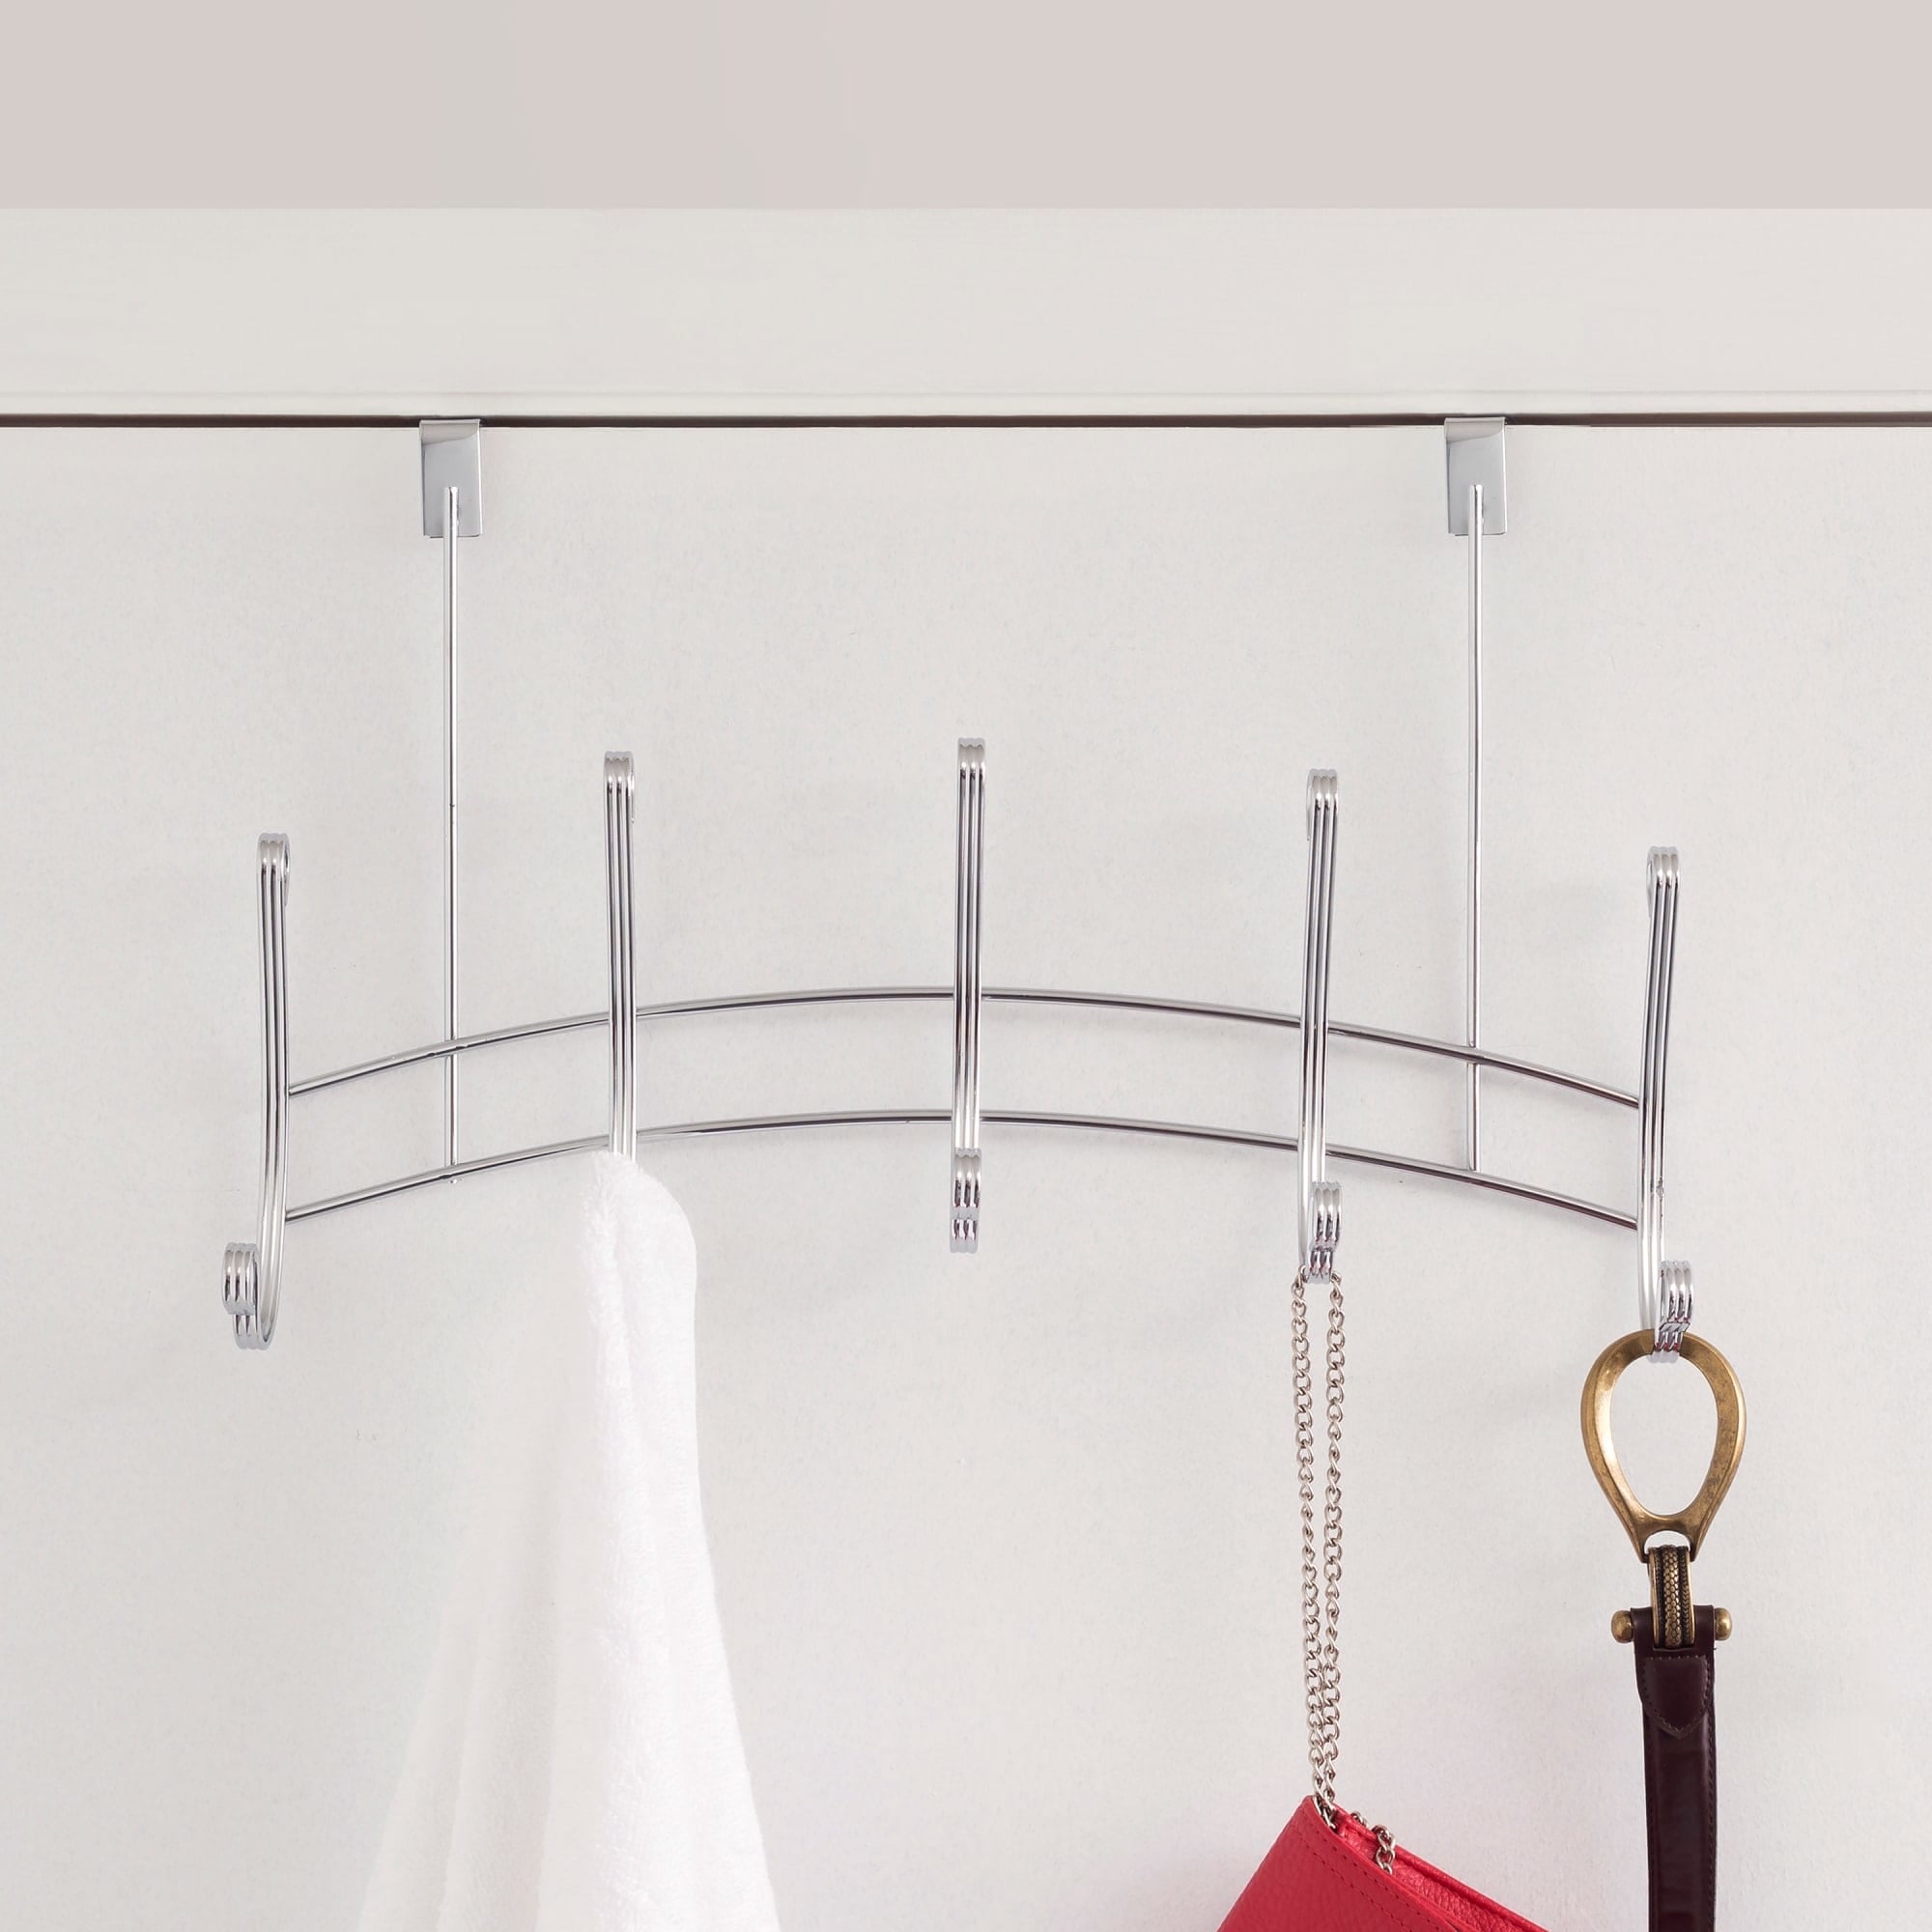 Home Basics Arch Chrome 5 Hook Over the Door Hanging Rack $6.00 EACH, CASE PACK OF 12